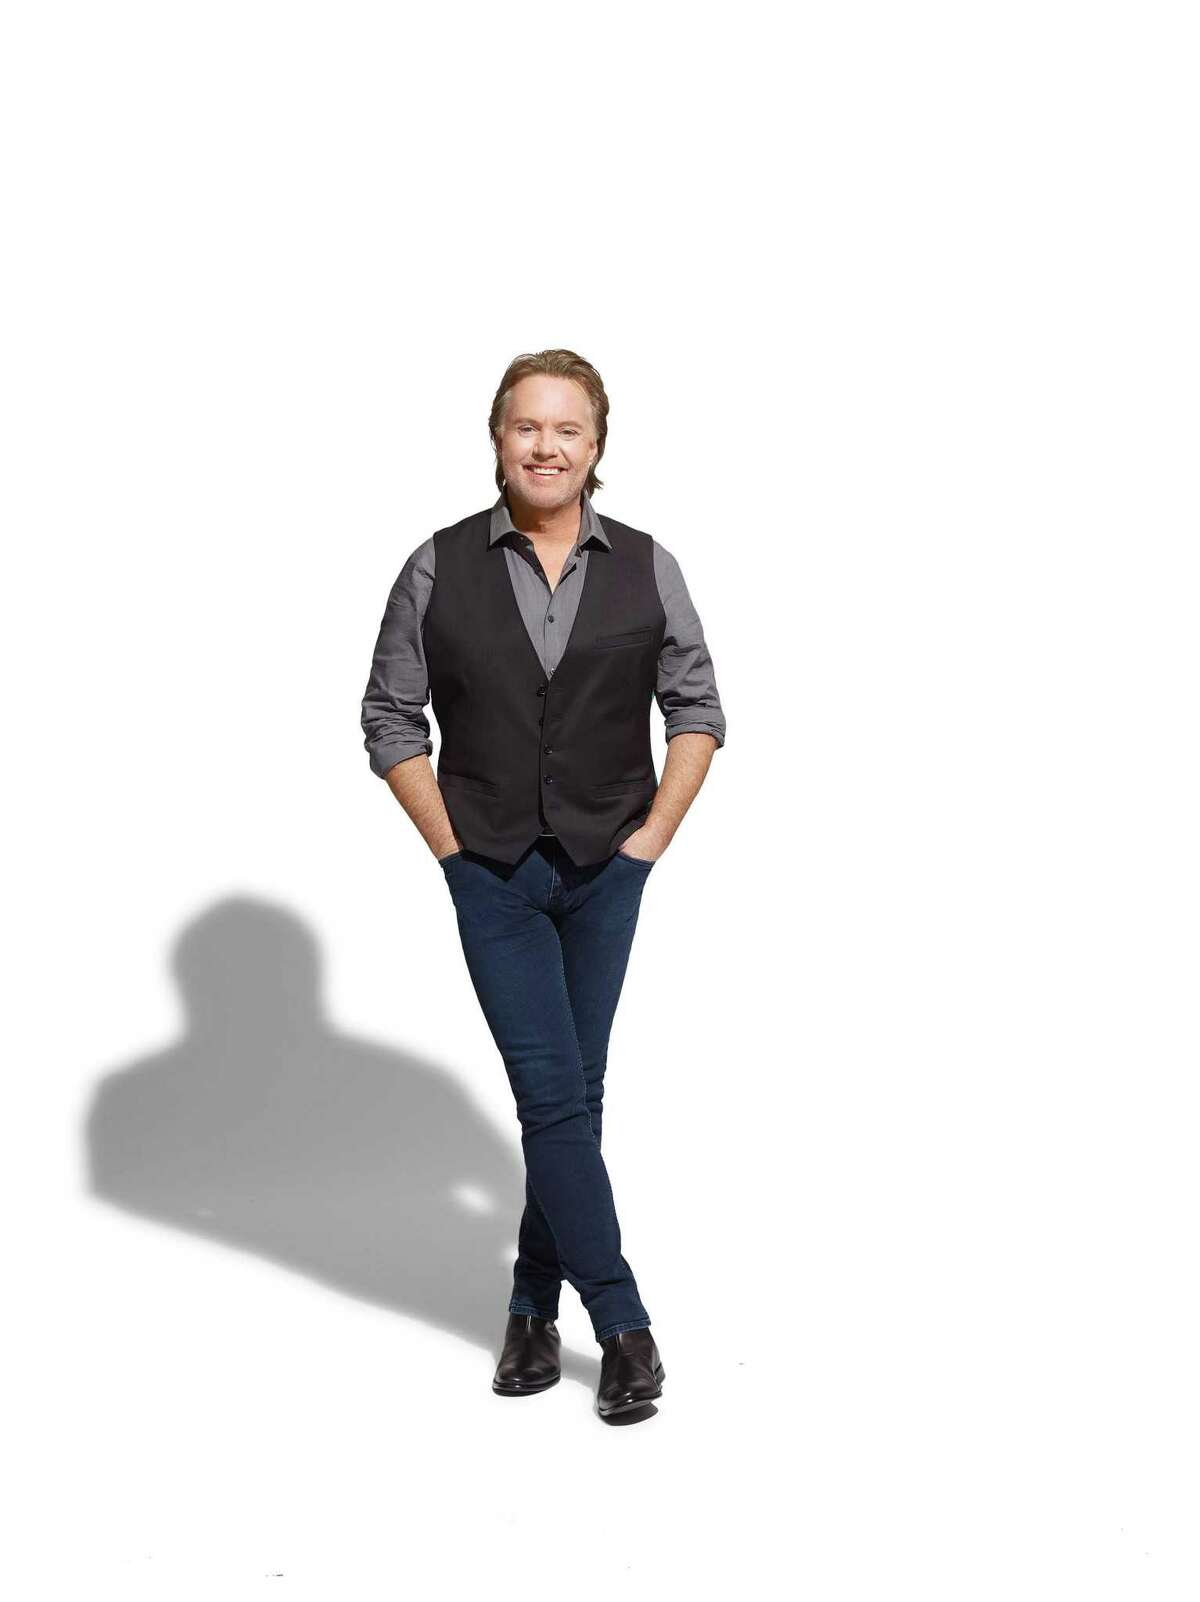 Shaun Cassidy will perform on Aug. 5 at 8 p.m. at the Ridgefield Playhouse, 80 East Ridge Road, Ridgefield. Tickets are $69.50-$150. For more information, visit ridgefieldplayhouse.org.